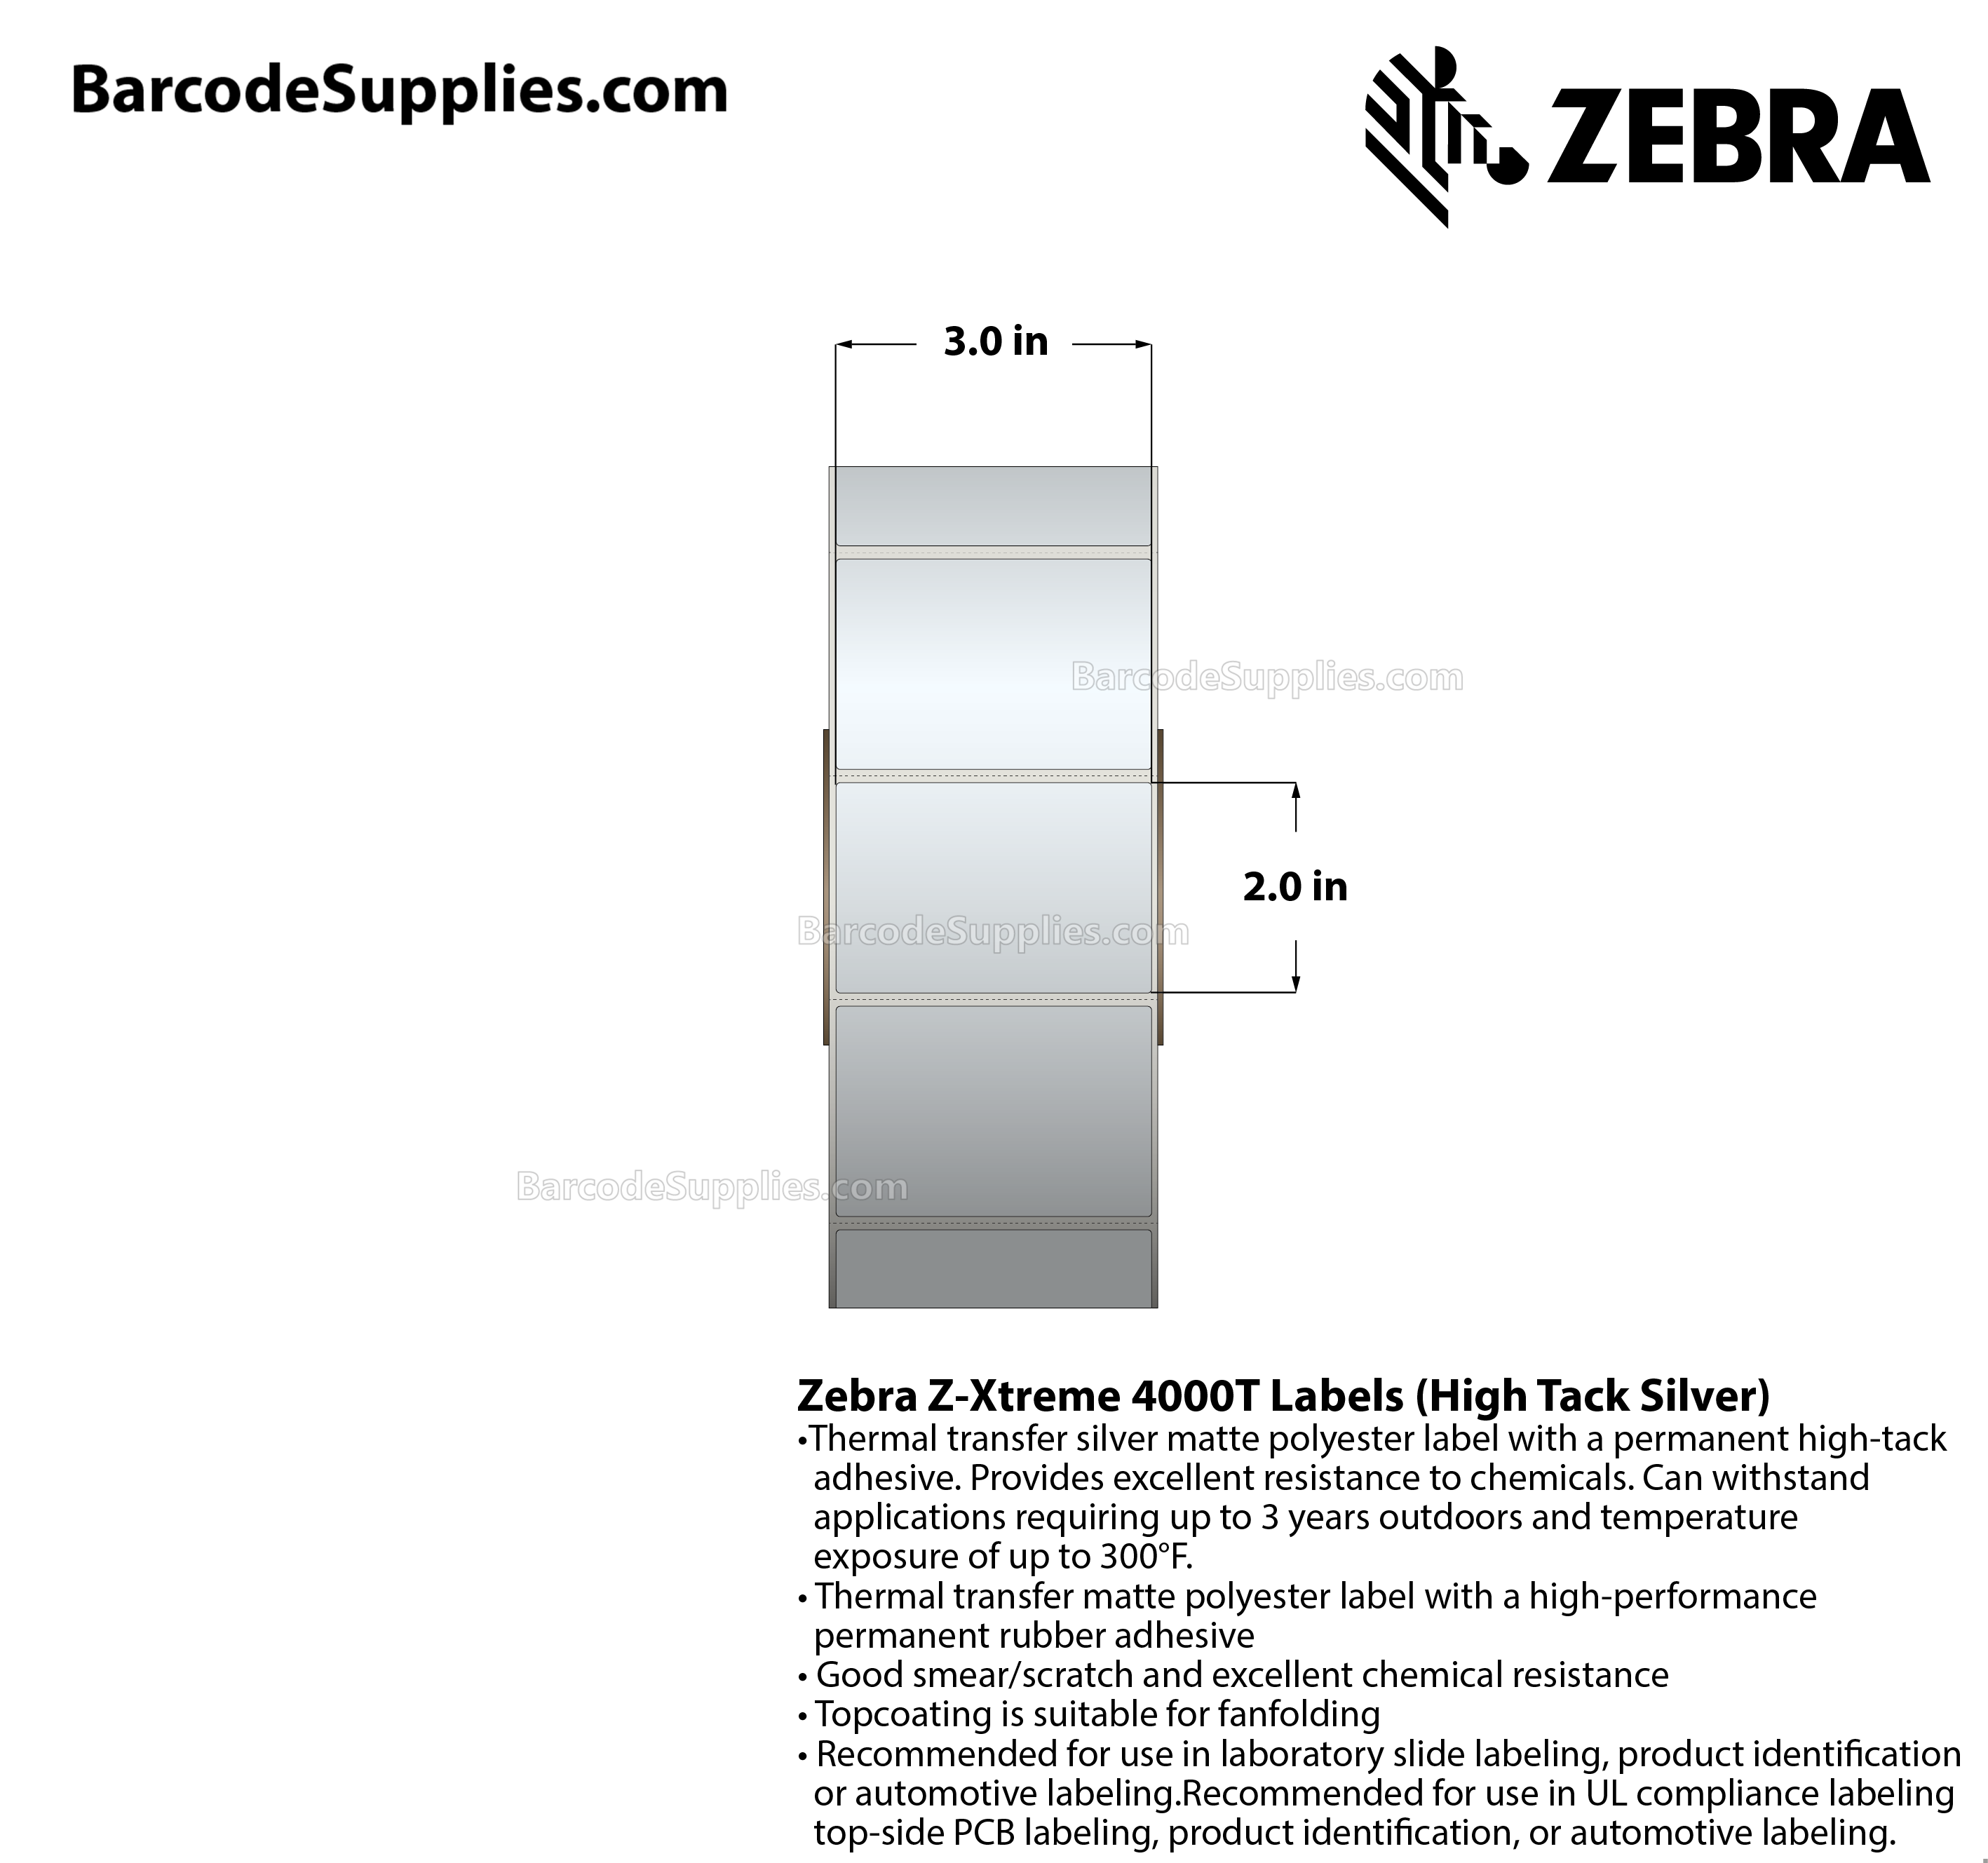 3 x 2 Thermal Transfer Silver Z-Xtreme 4000T High-Tack Silver Labels With High-tack Adhesive - Perforated - 1000 Labels Per Roll - Carton Of 1 Rolls - 1000 Labels Total - MPN: 10023180